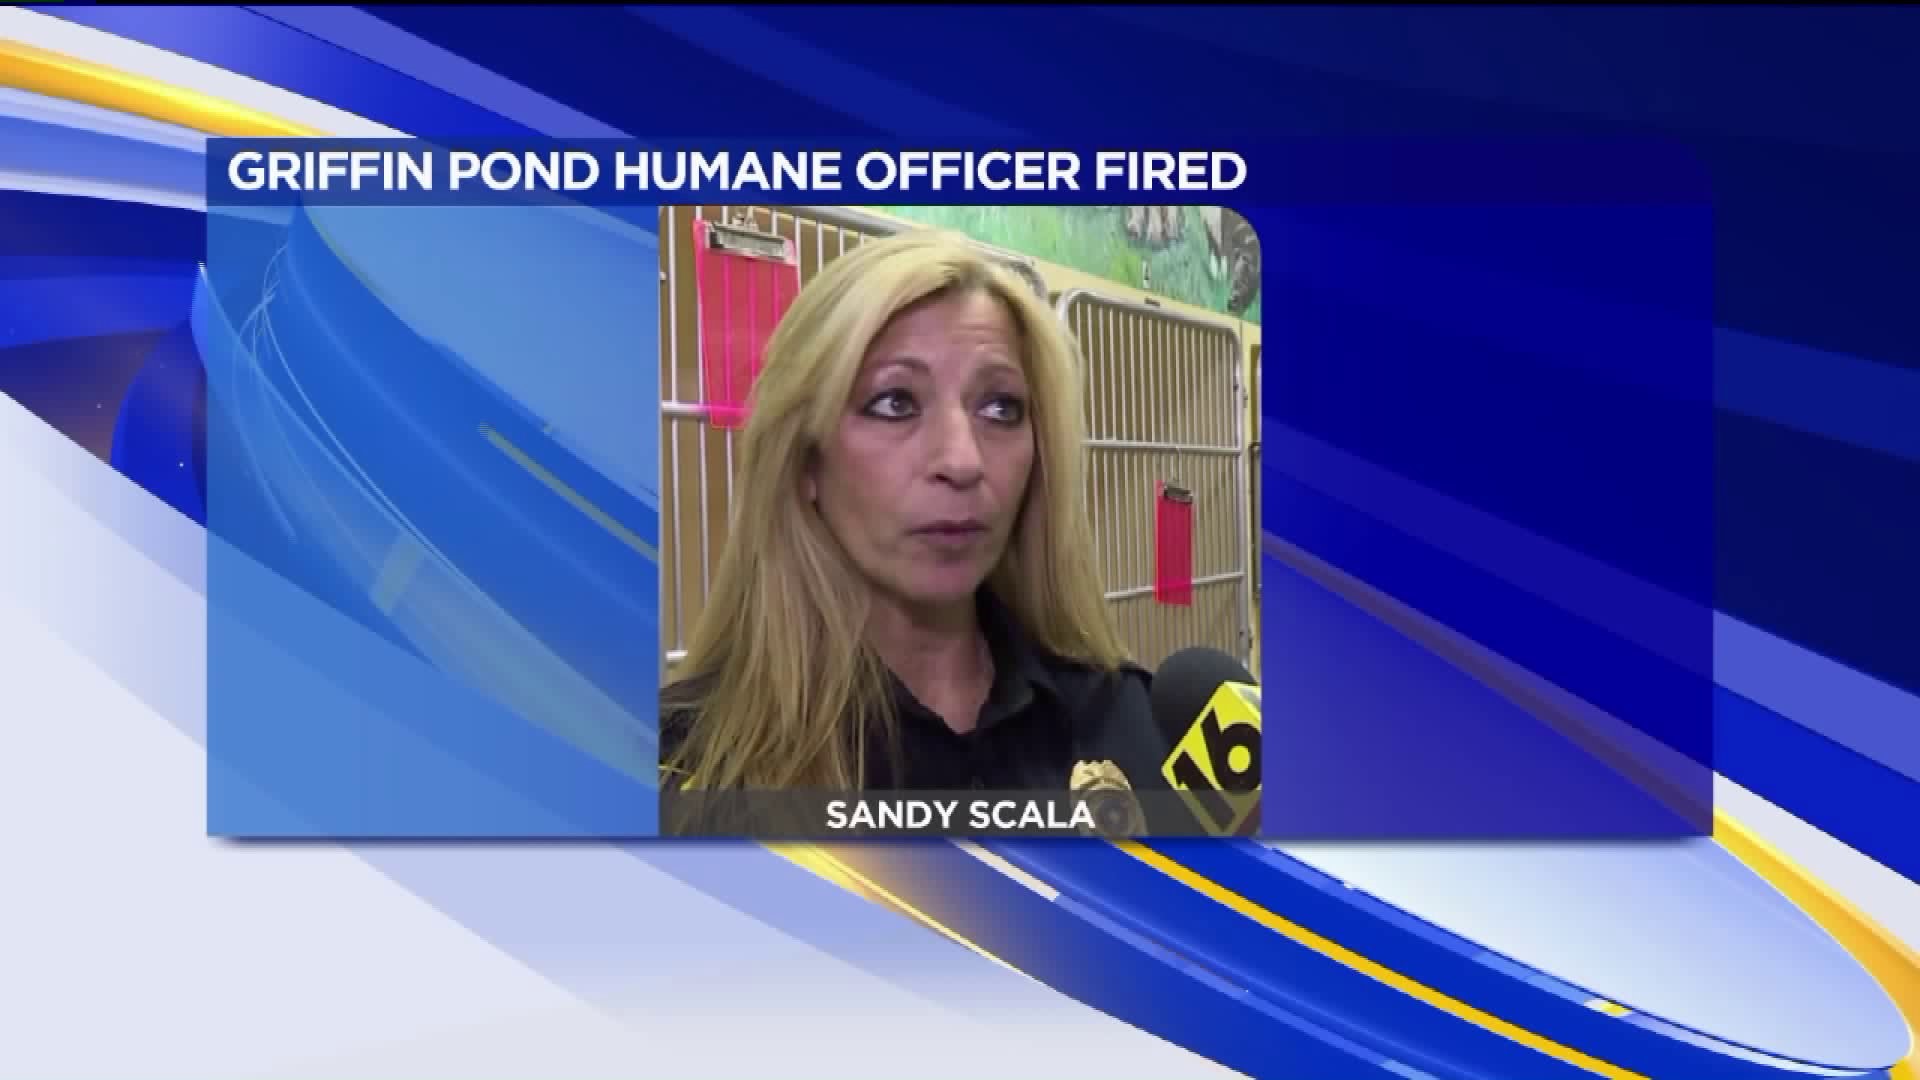 Humane Officer Fired from Griffin Pond Animal Shelter